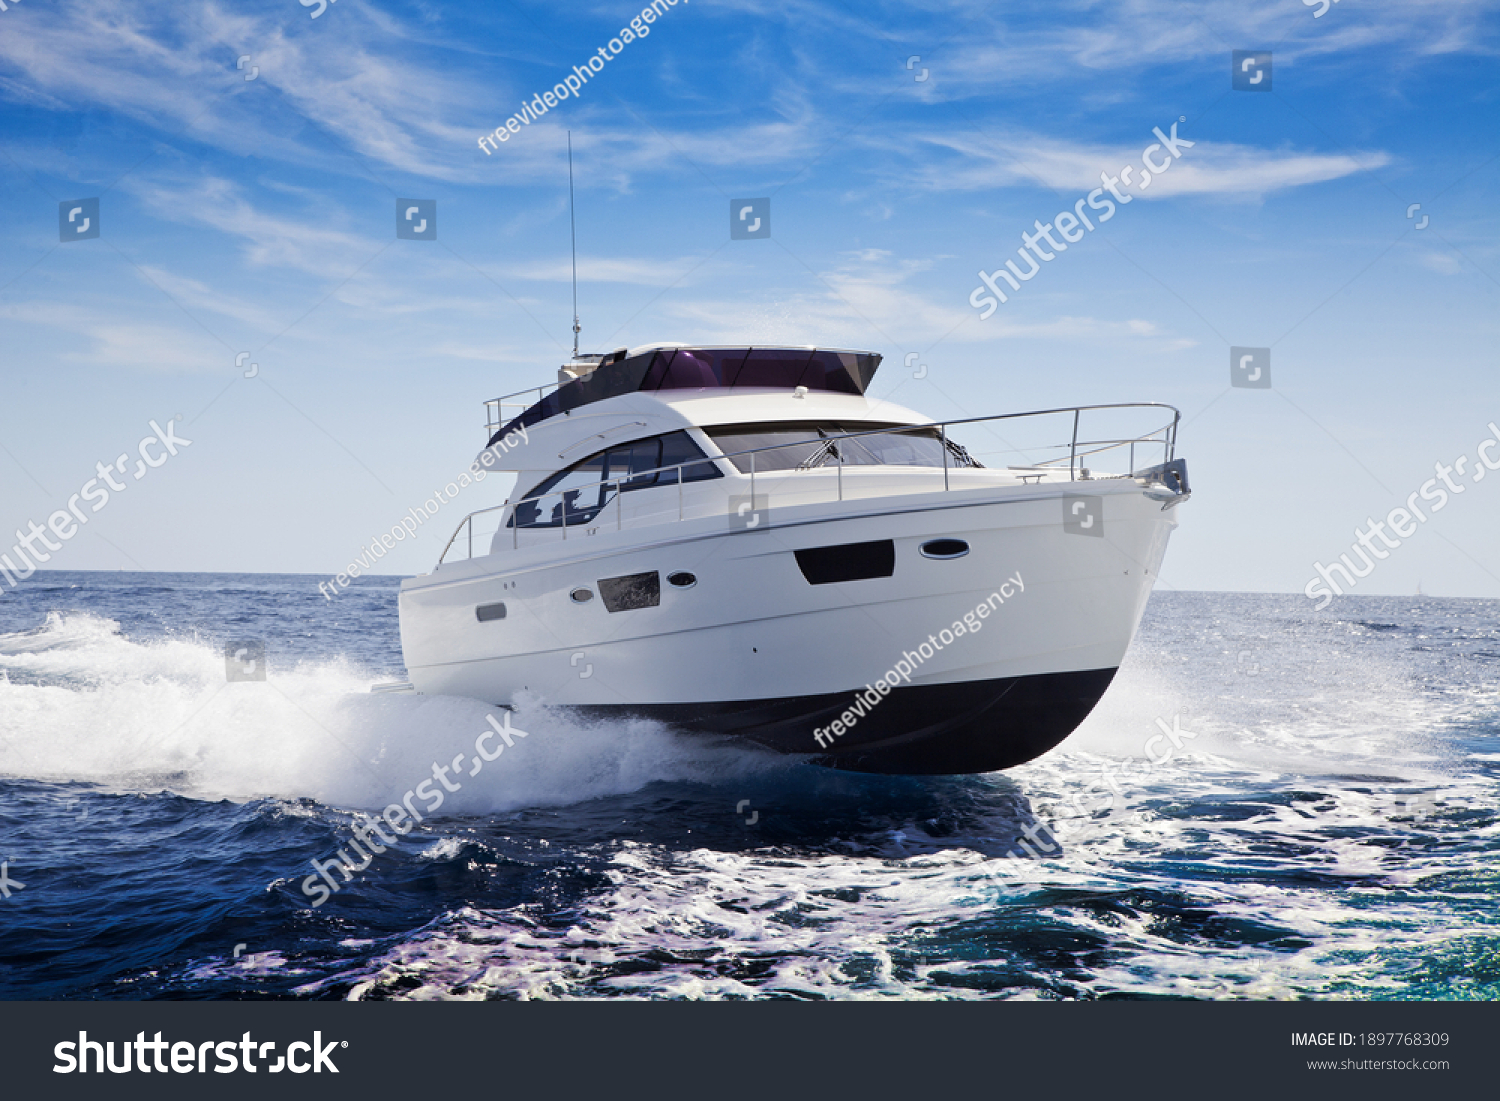 fast motor yacht in navigation, sea view #1897768309